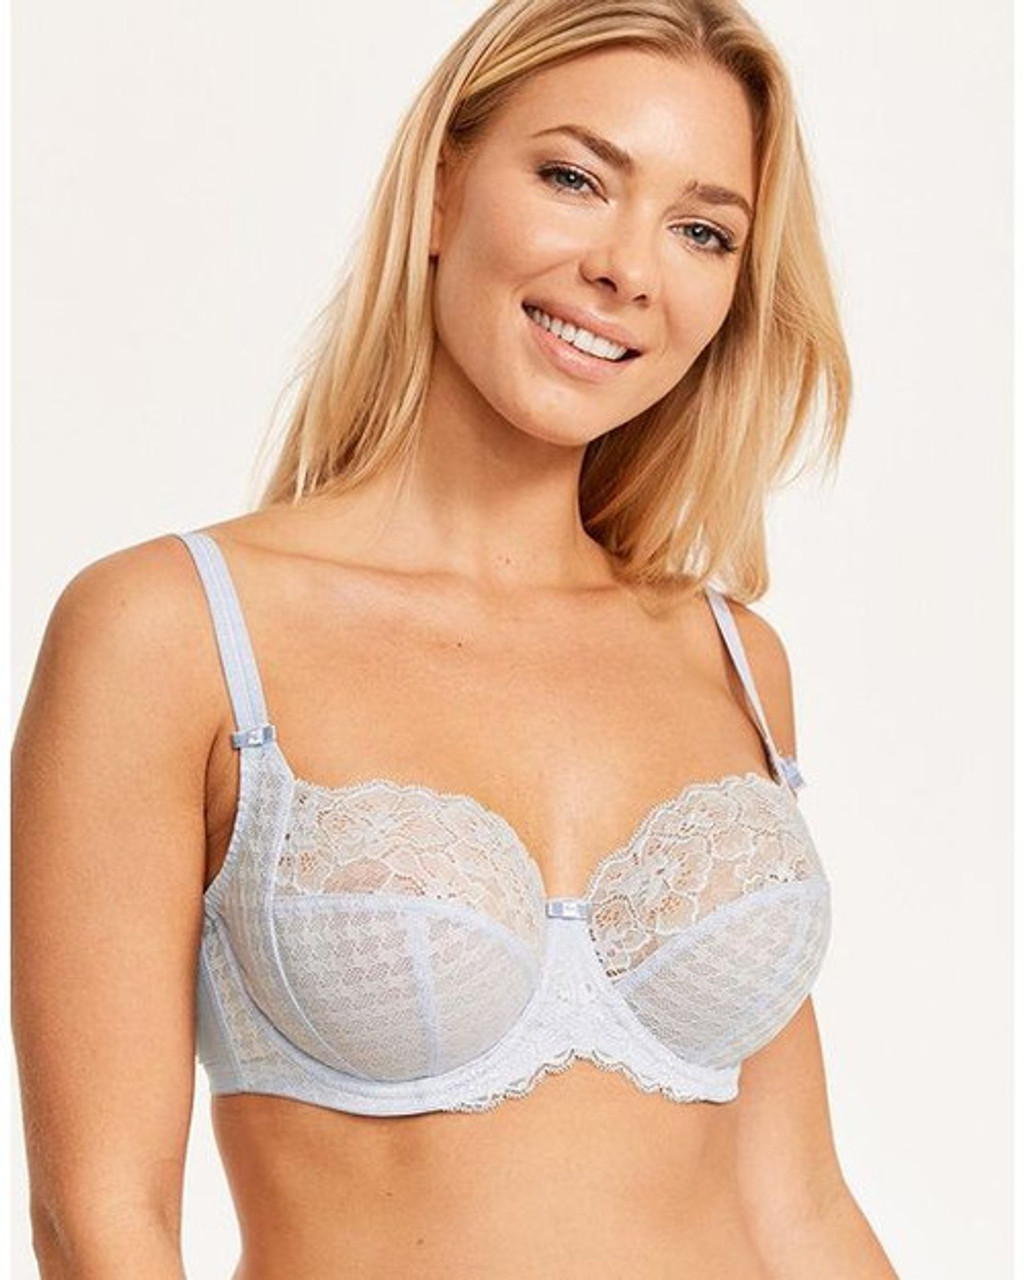 Panache Lingerie - Envy is back in this stunning Lilac shade, a